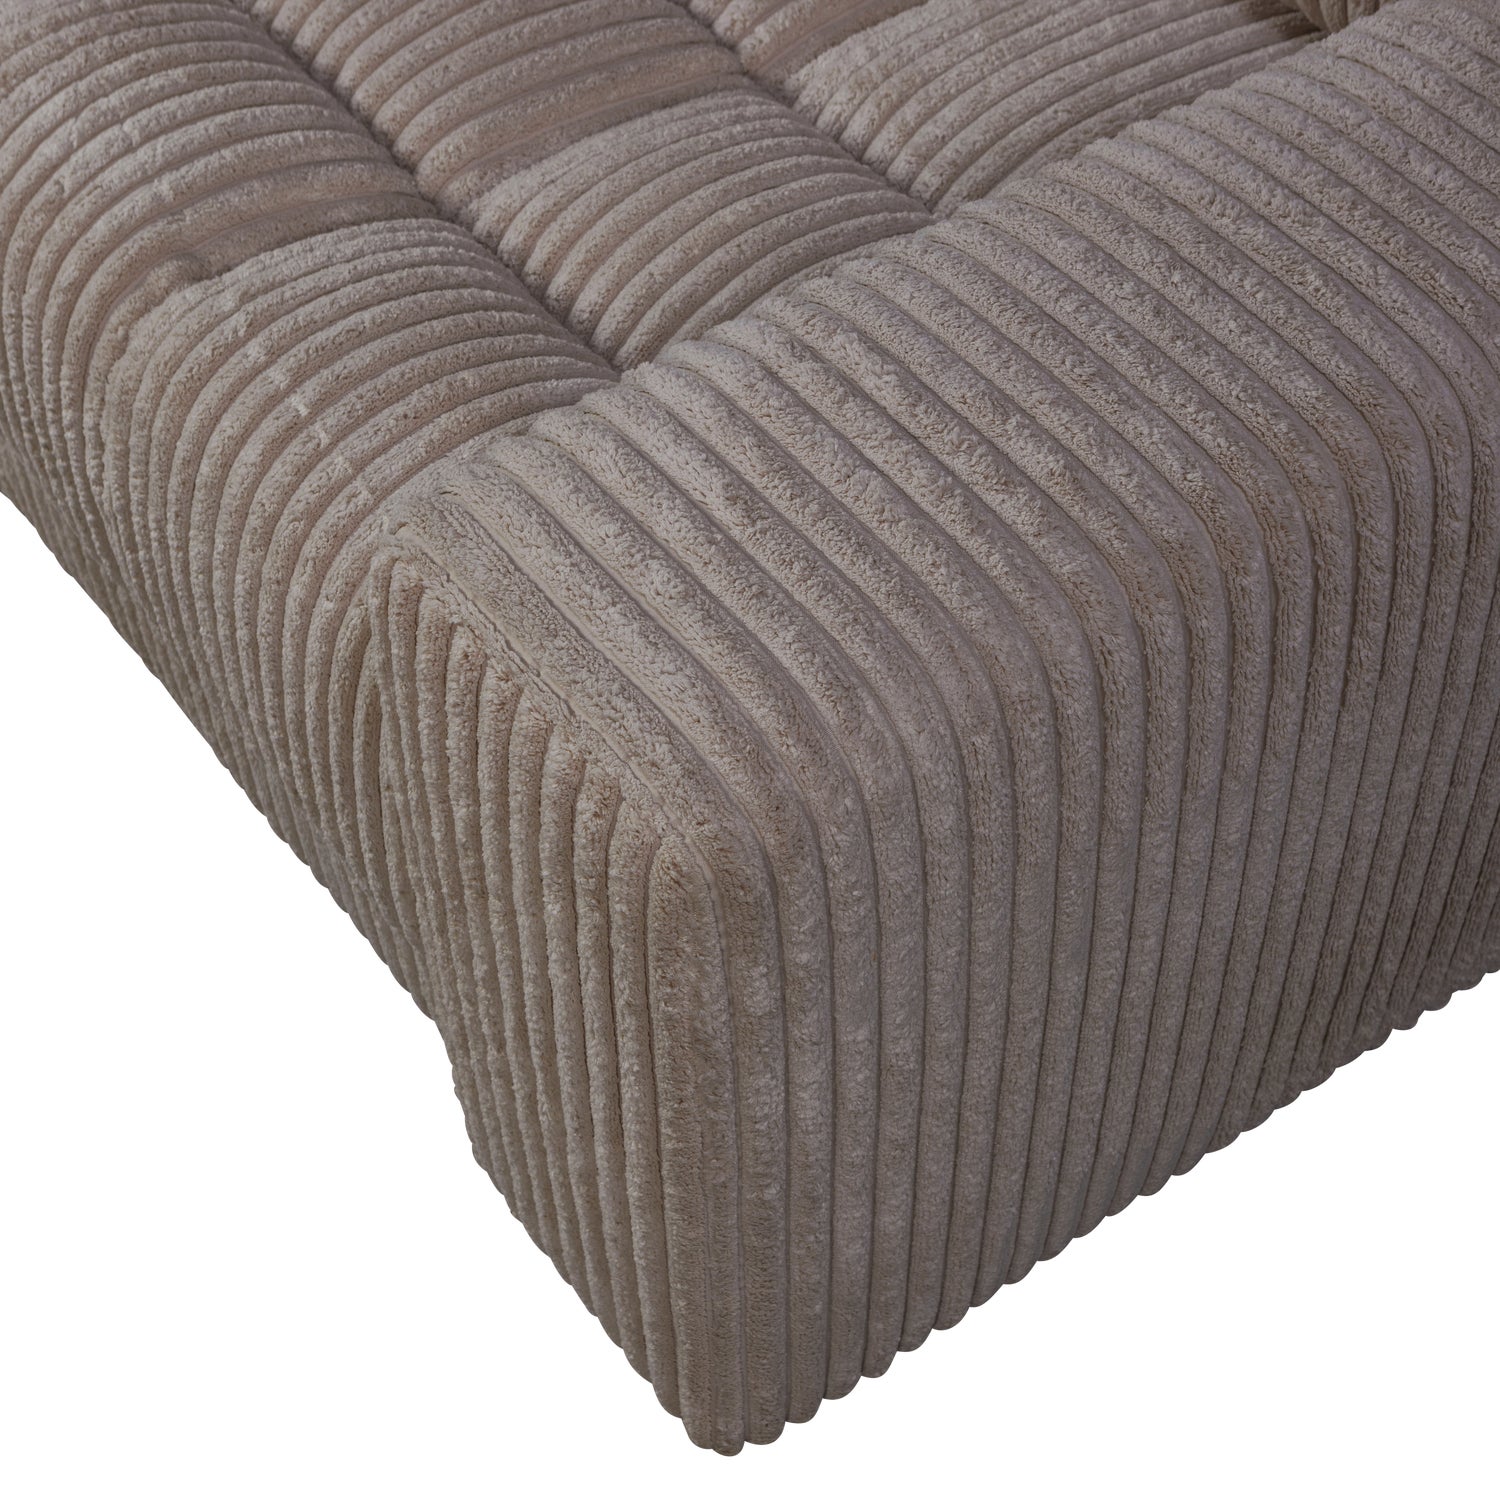 379006-RM-01_VS_WE_Second_date_loveseat_grove_ribstof_mud_detail.png?auto=webp&format=png&width=1500&height=1500